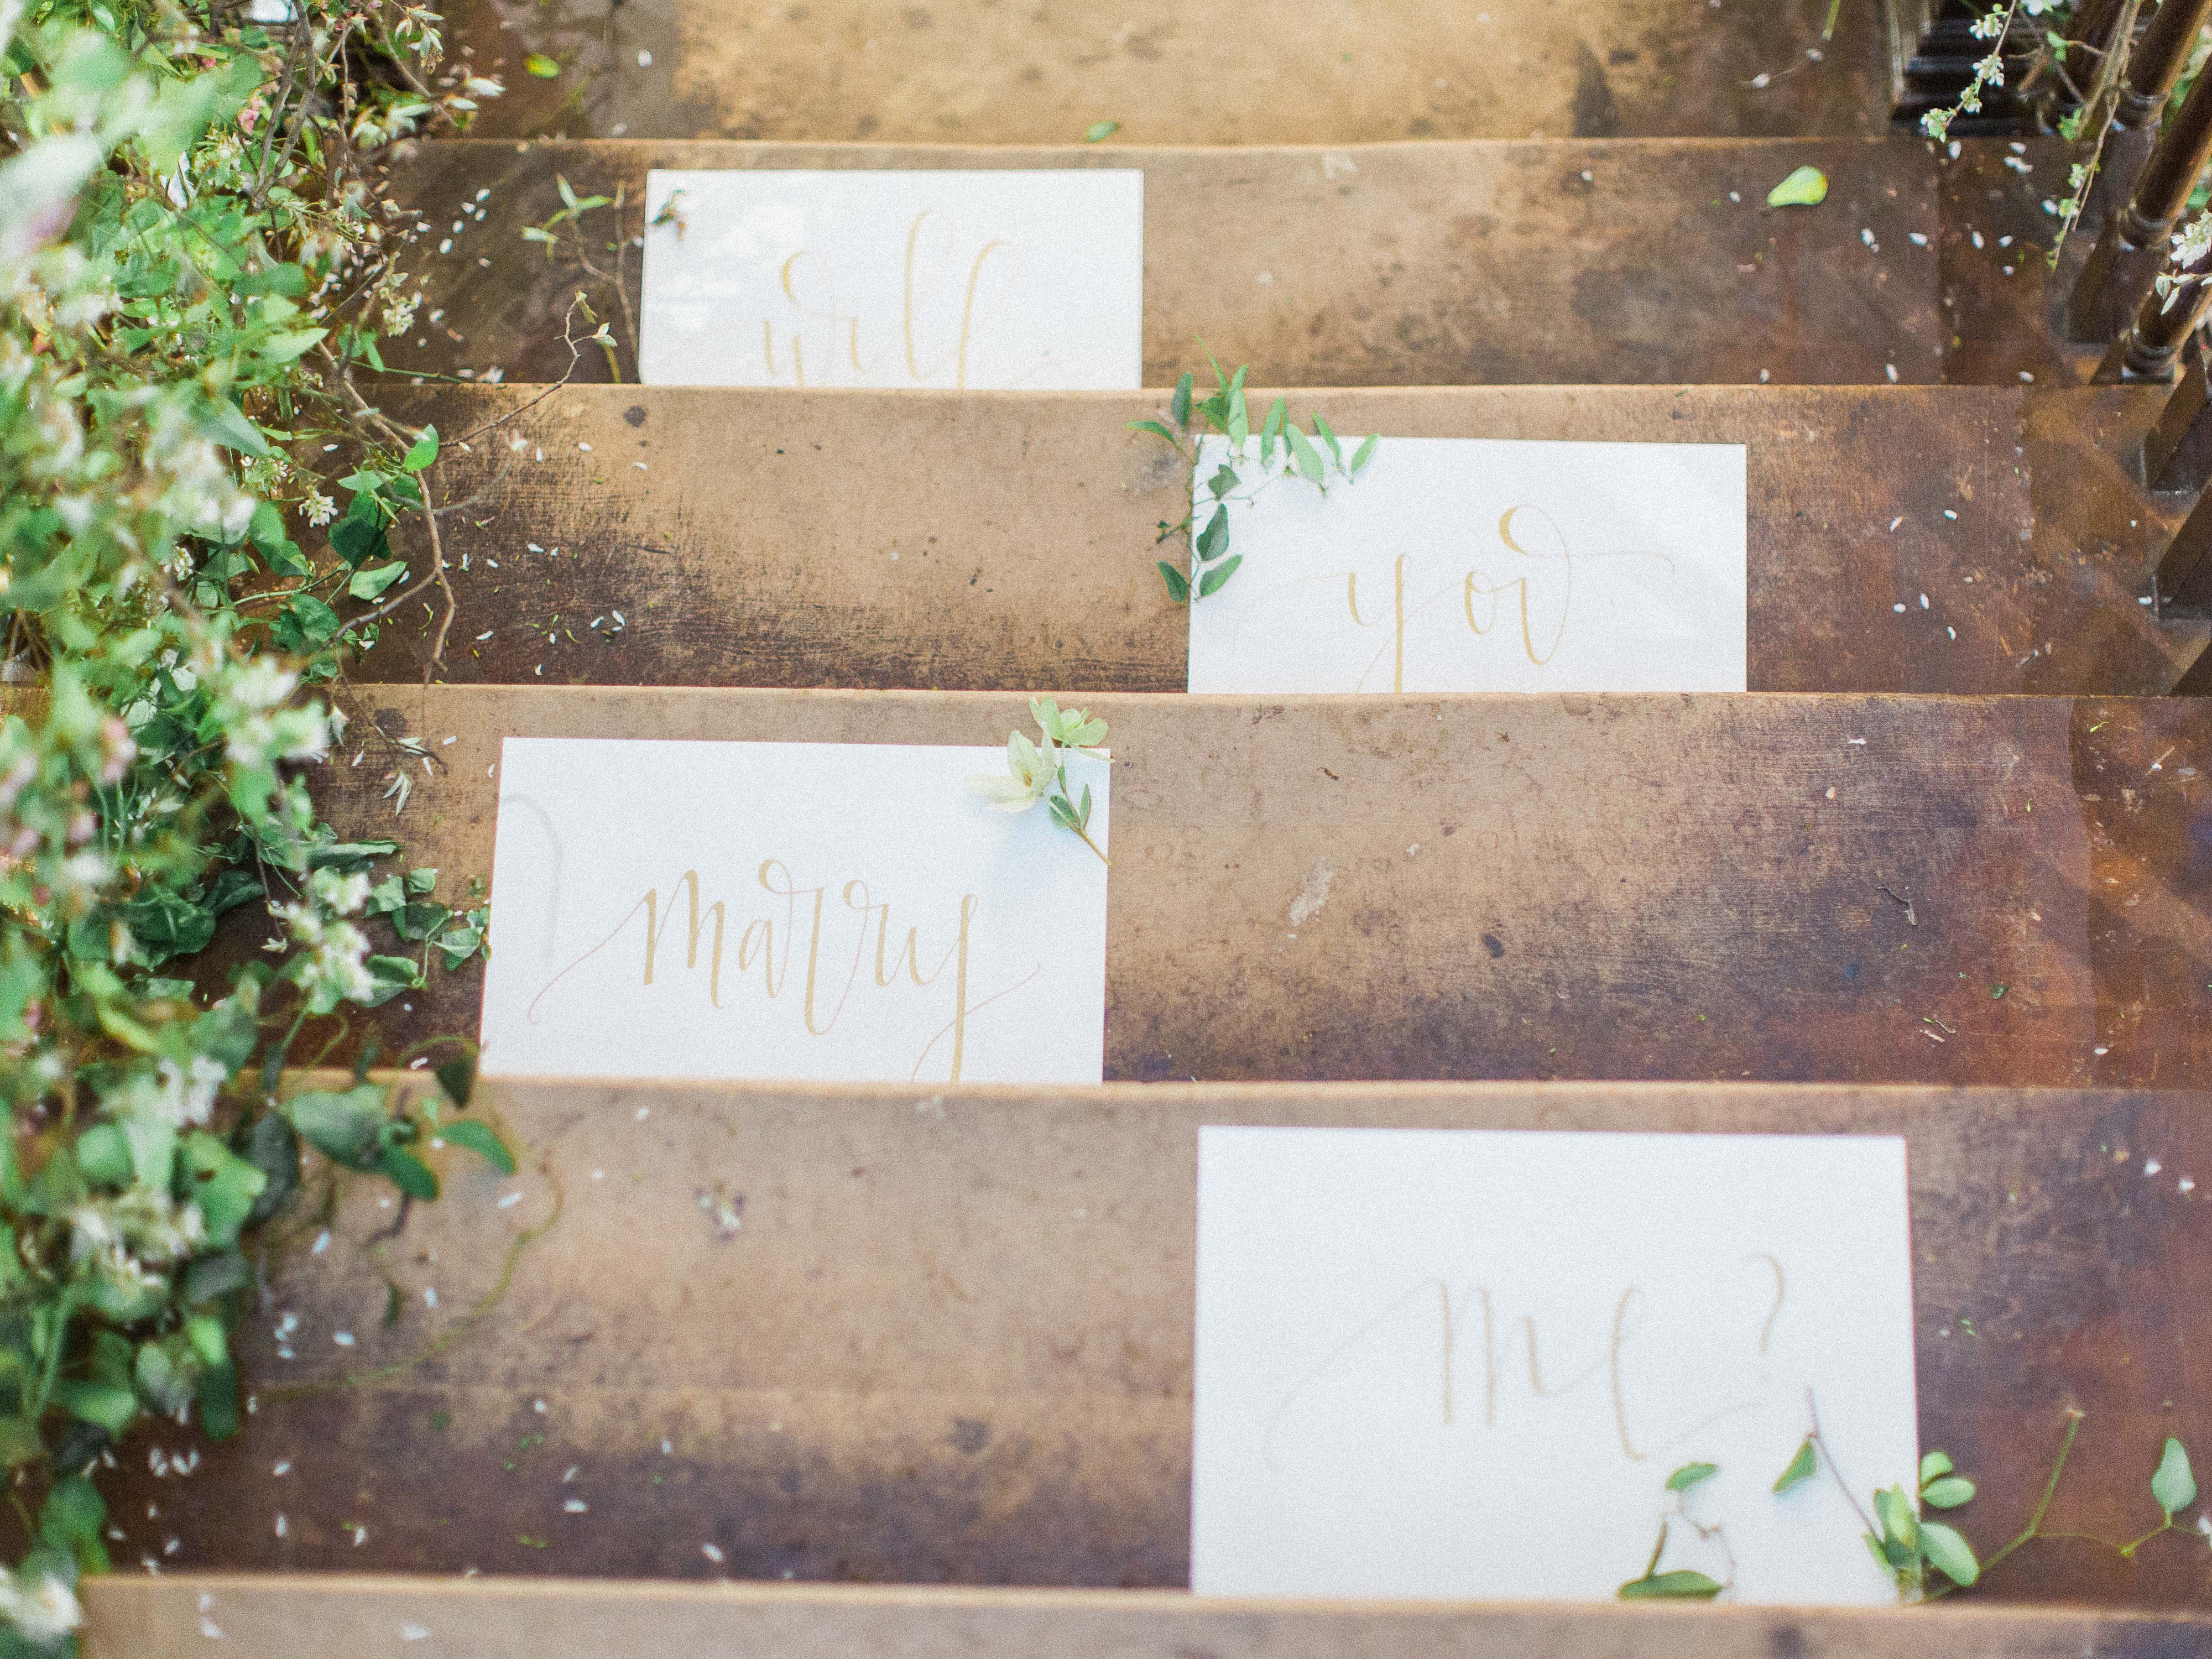 Will You Marry Me? | Proposal Ideas | The Day's Design | Samantha James Photography